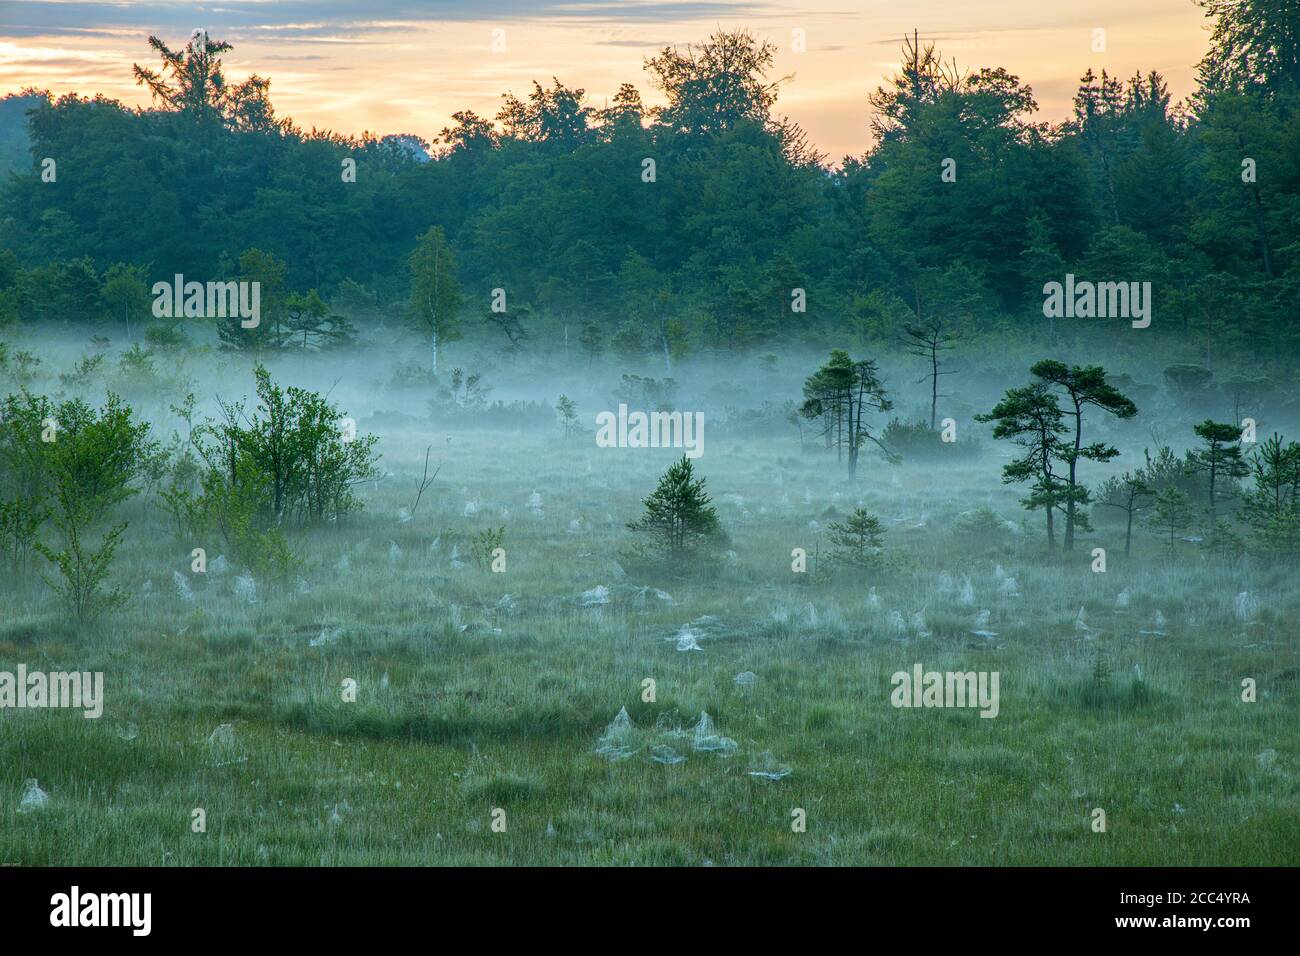 Sheet-web weaver, Line-weaving spider, Line weaver (Linyphia triangularis), fog bank at a high moor with several webs with morning dew , Germany Stock Photo